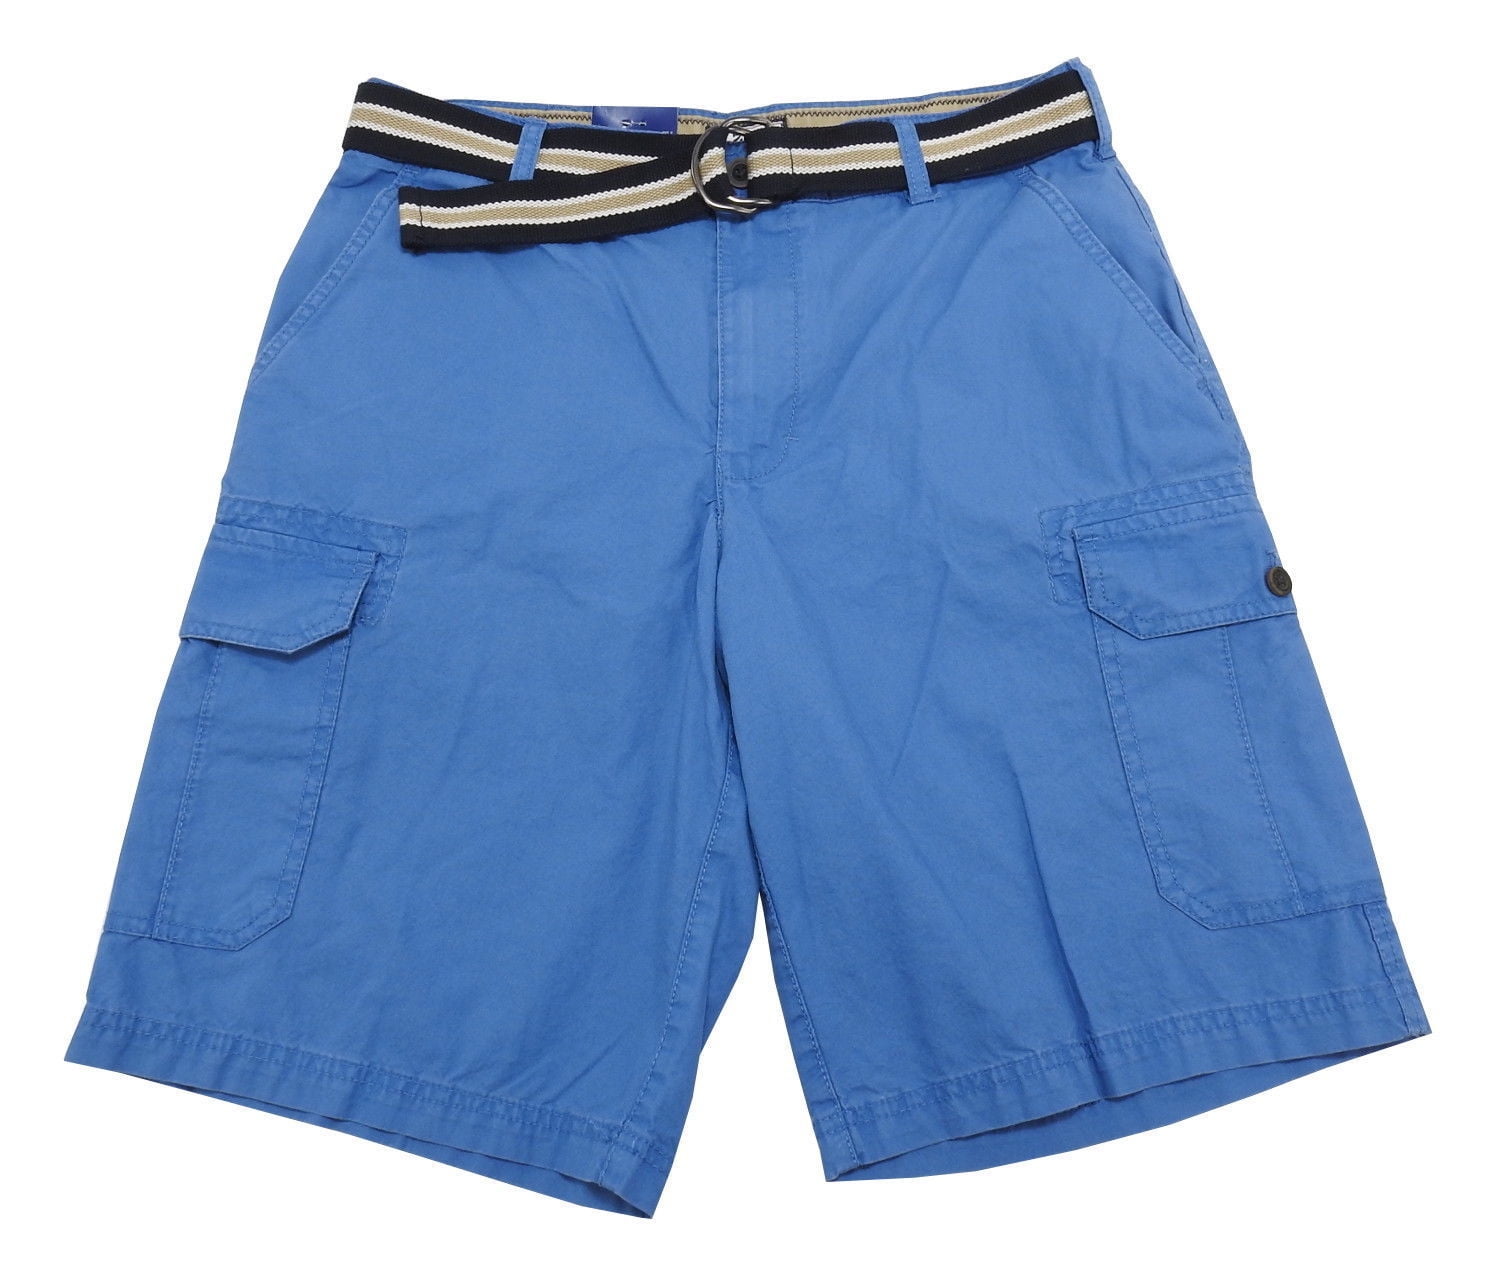 IZOD Saltwater Mens Size 32 Flat Front Belted Cargo Shorts, Federal ...